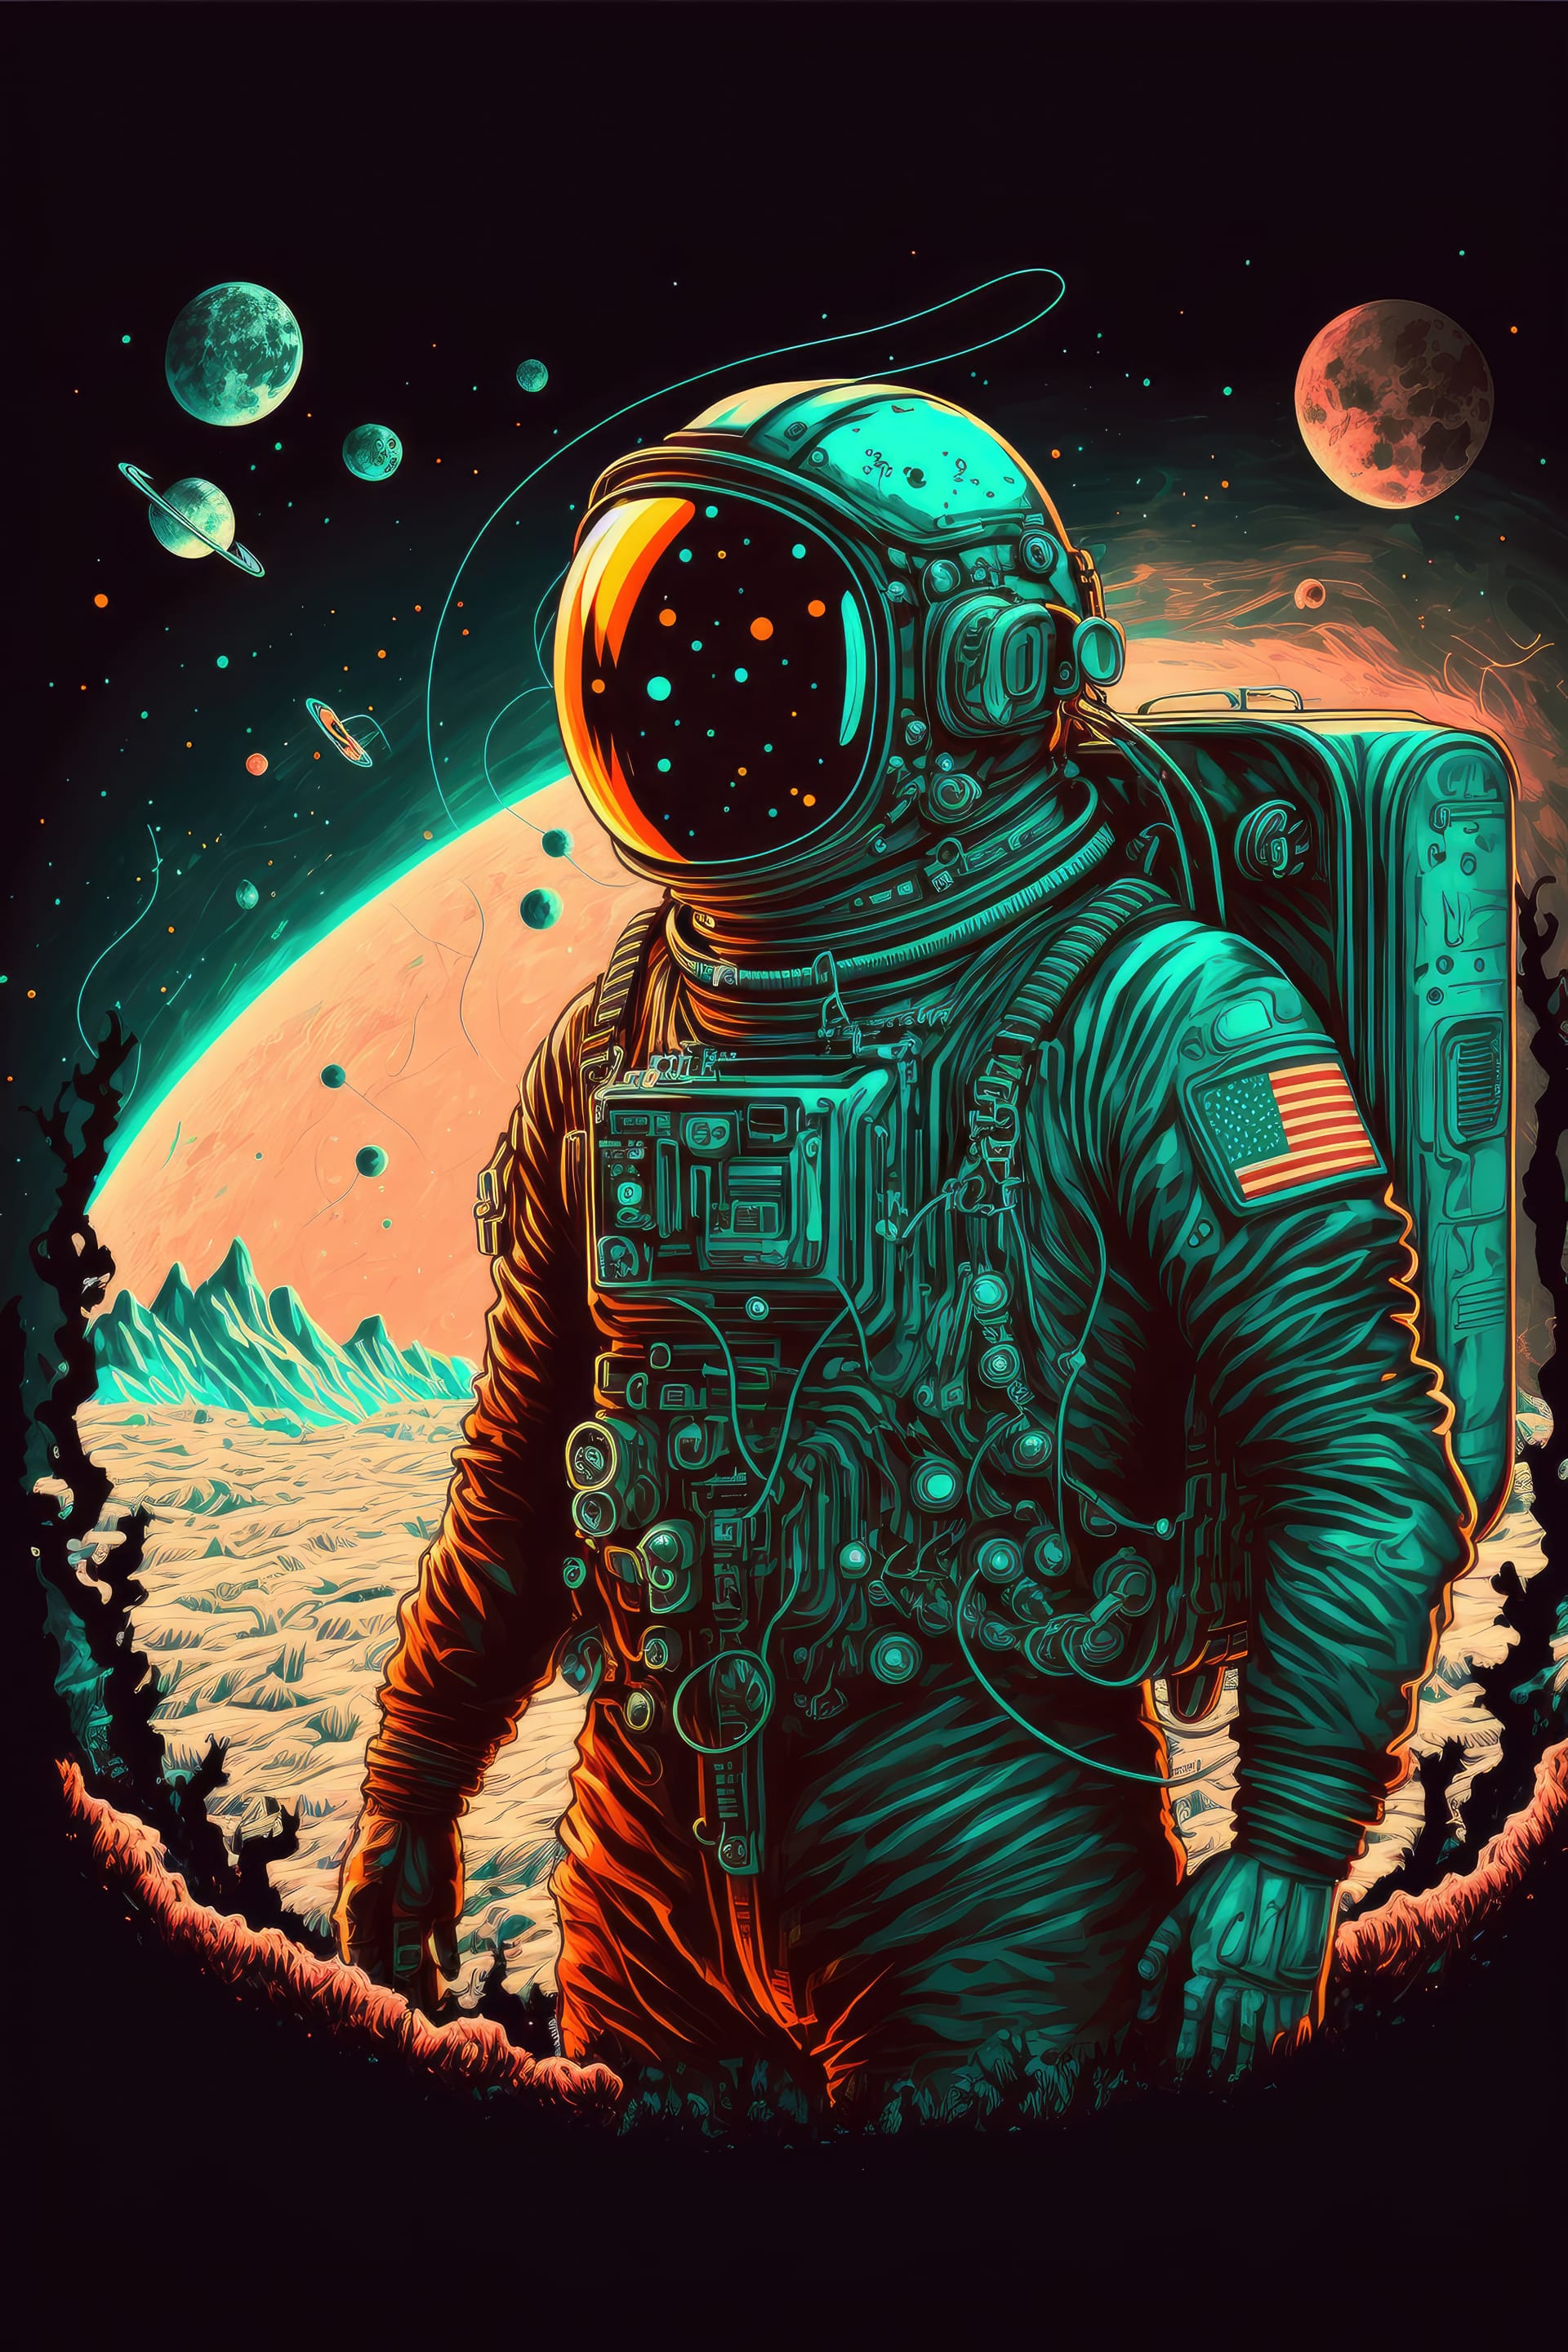 With astronaut planets stars vintage style illustration generated excellent image